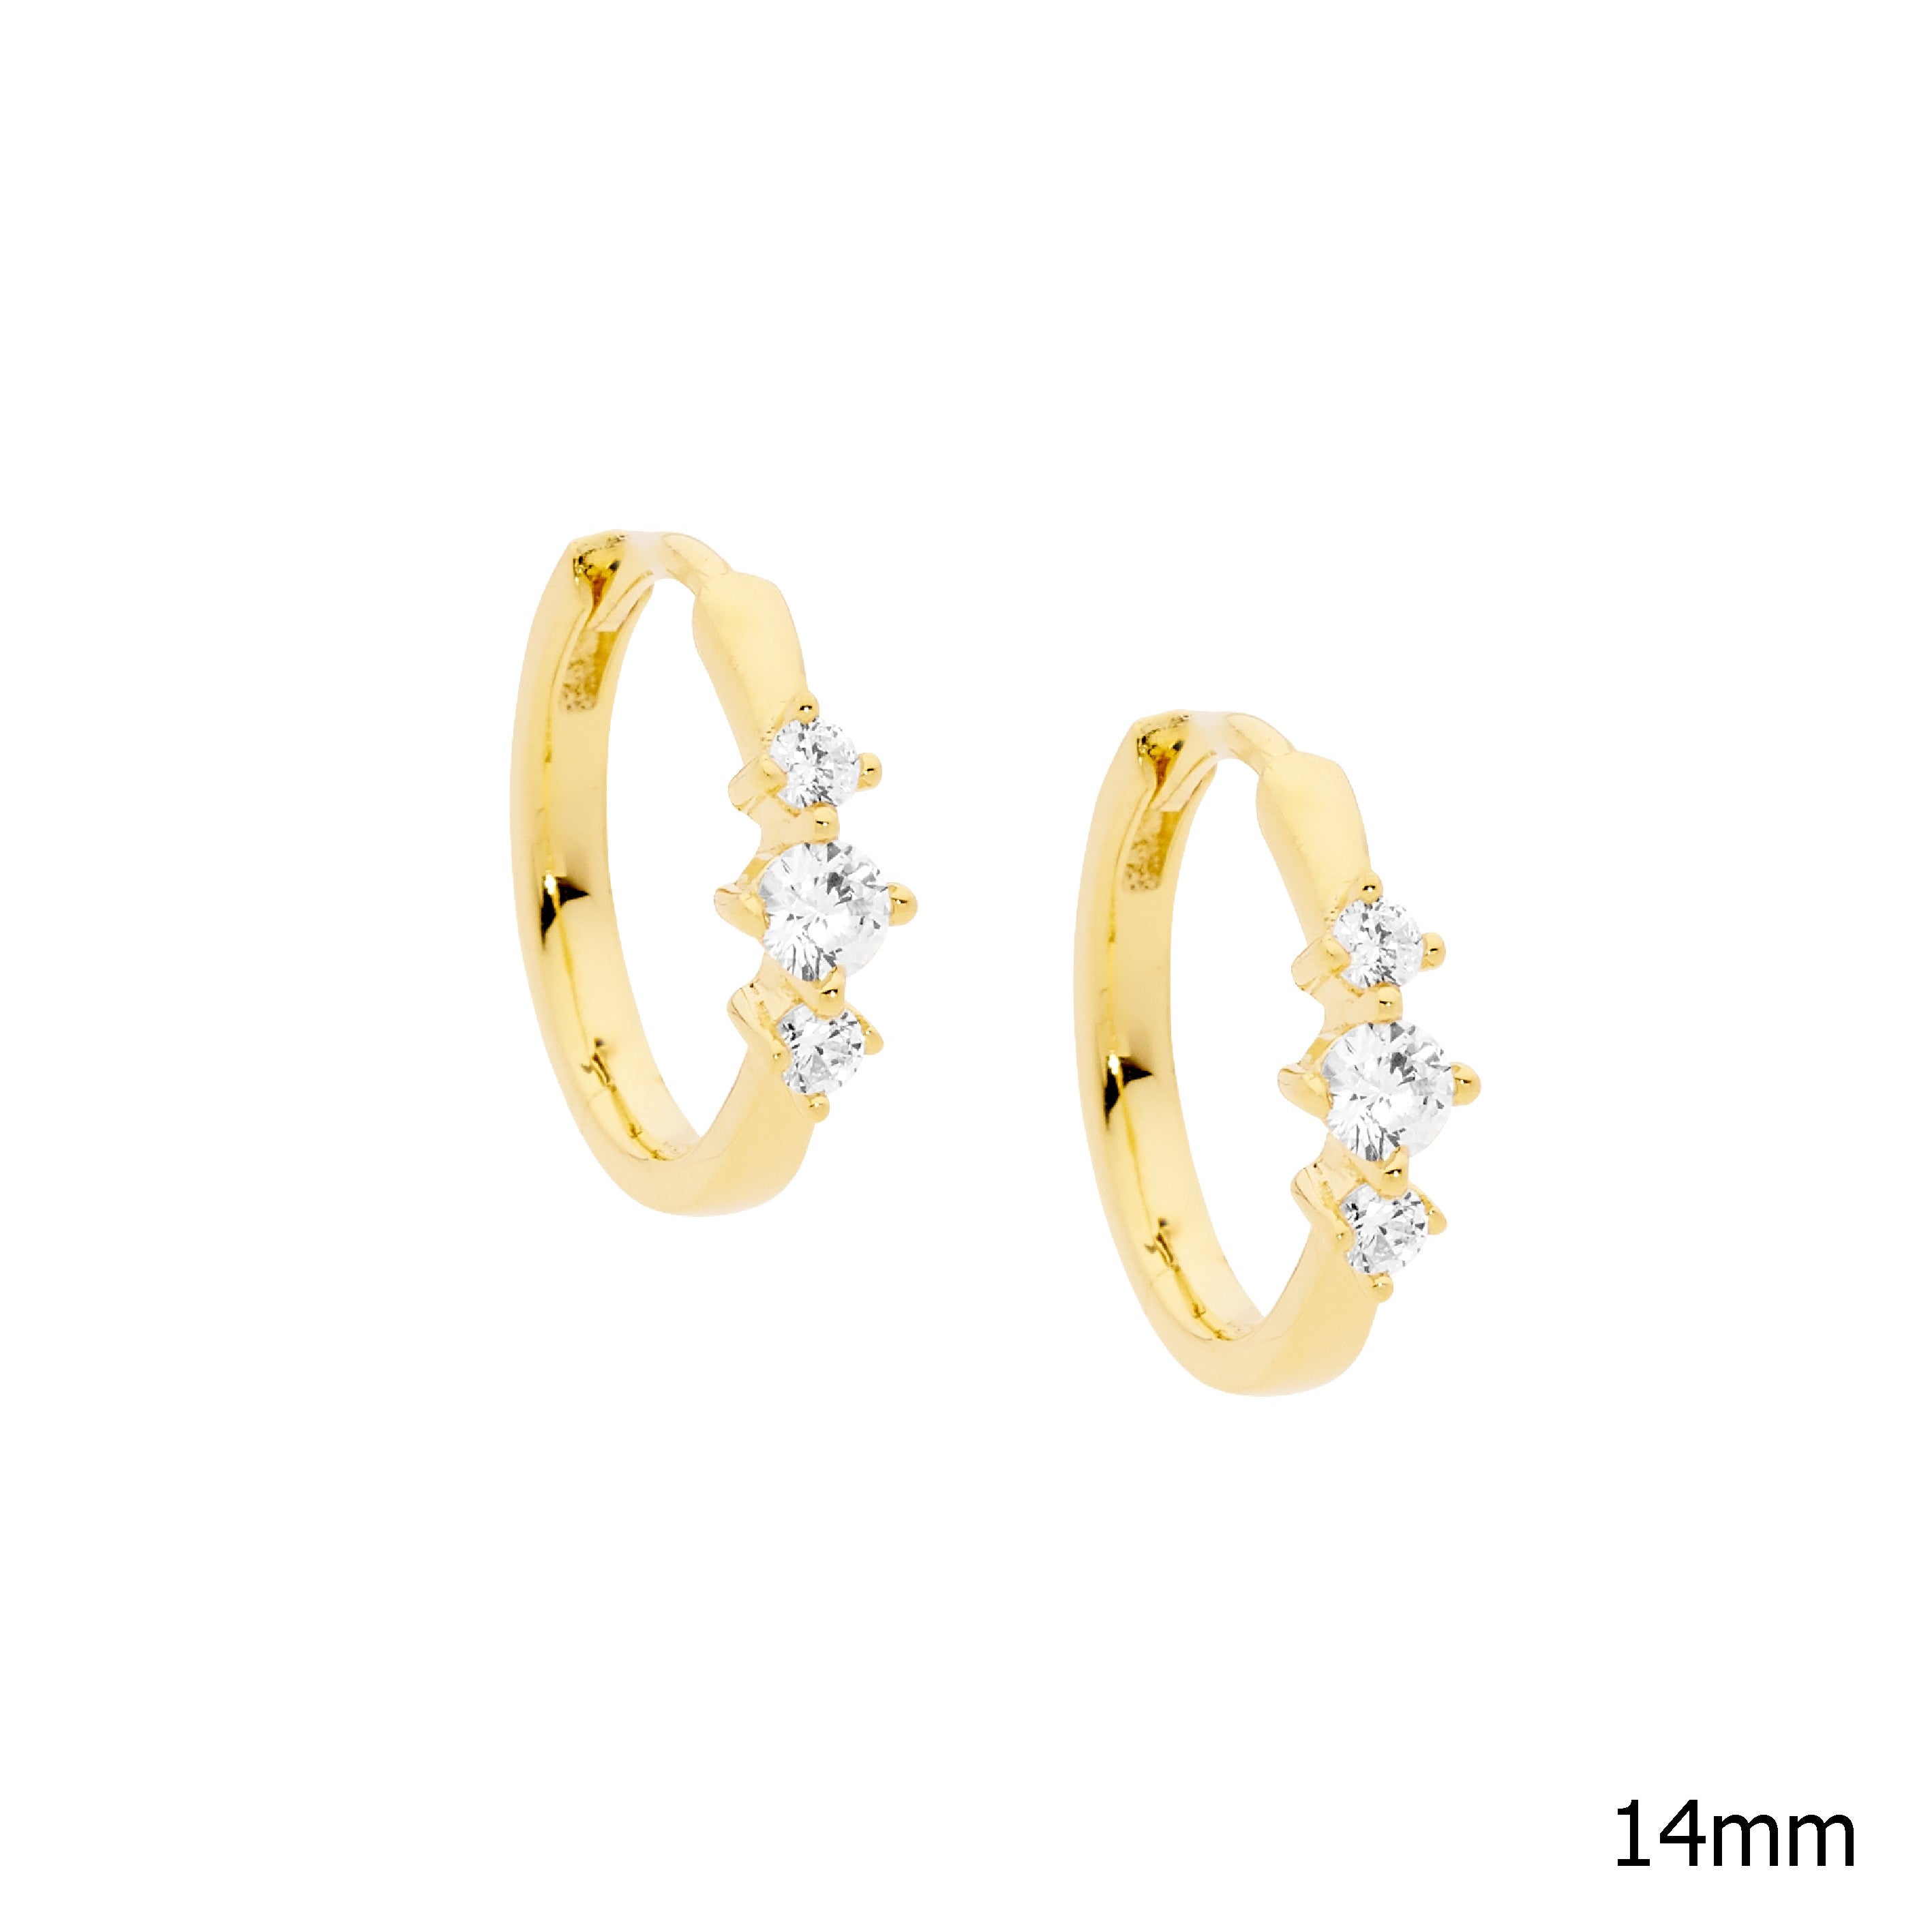 Sterling Silver 14mm Hoop Earrings with Cubic Zirconia Feature Gold Plating #